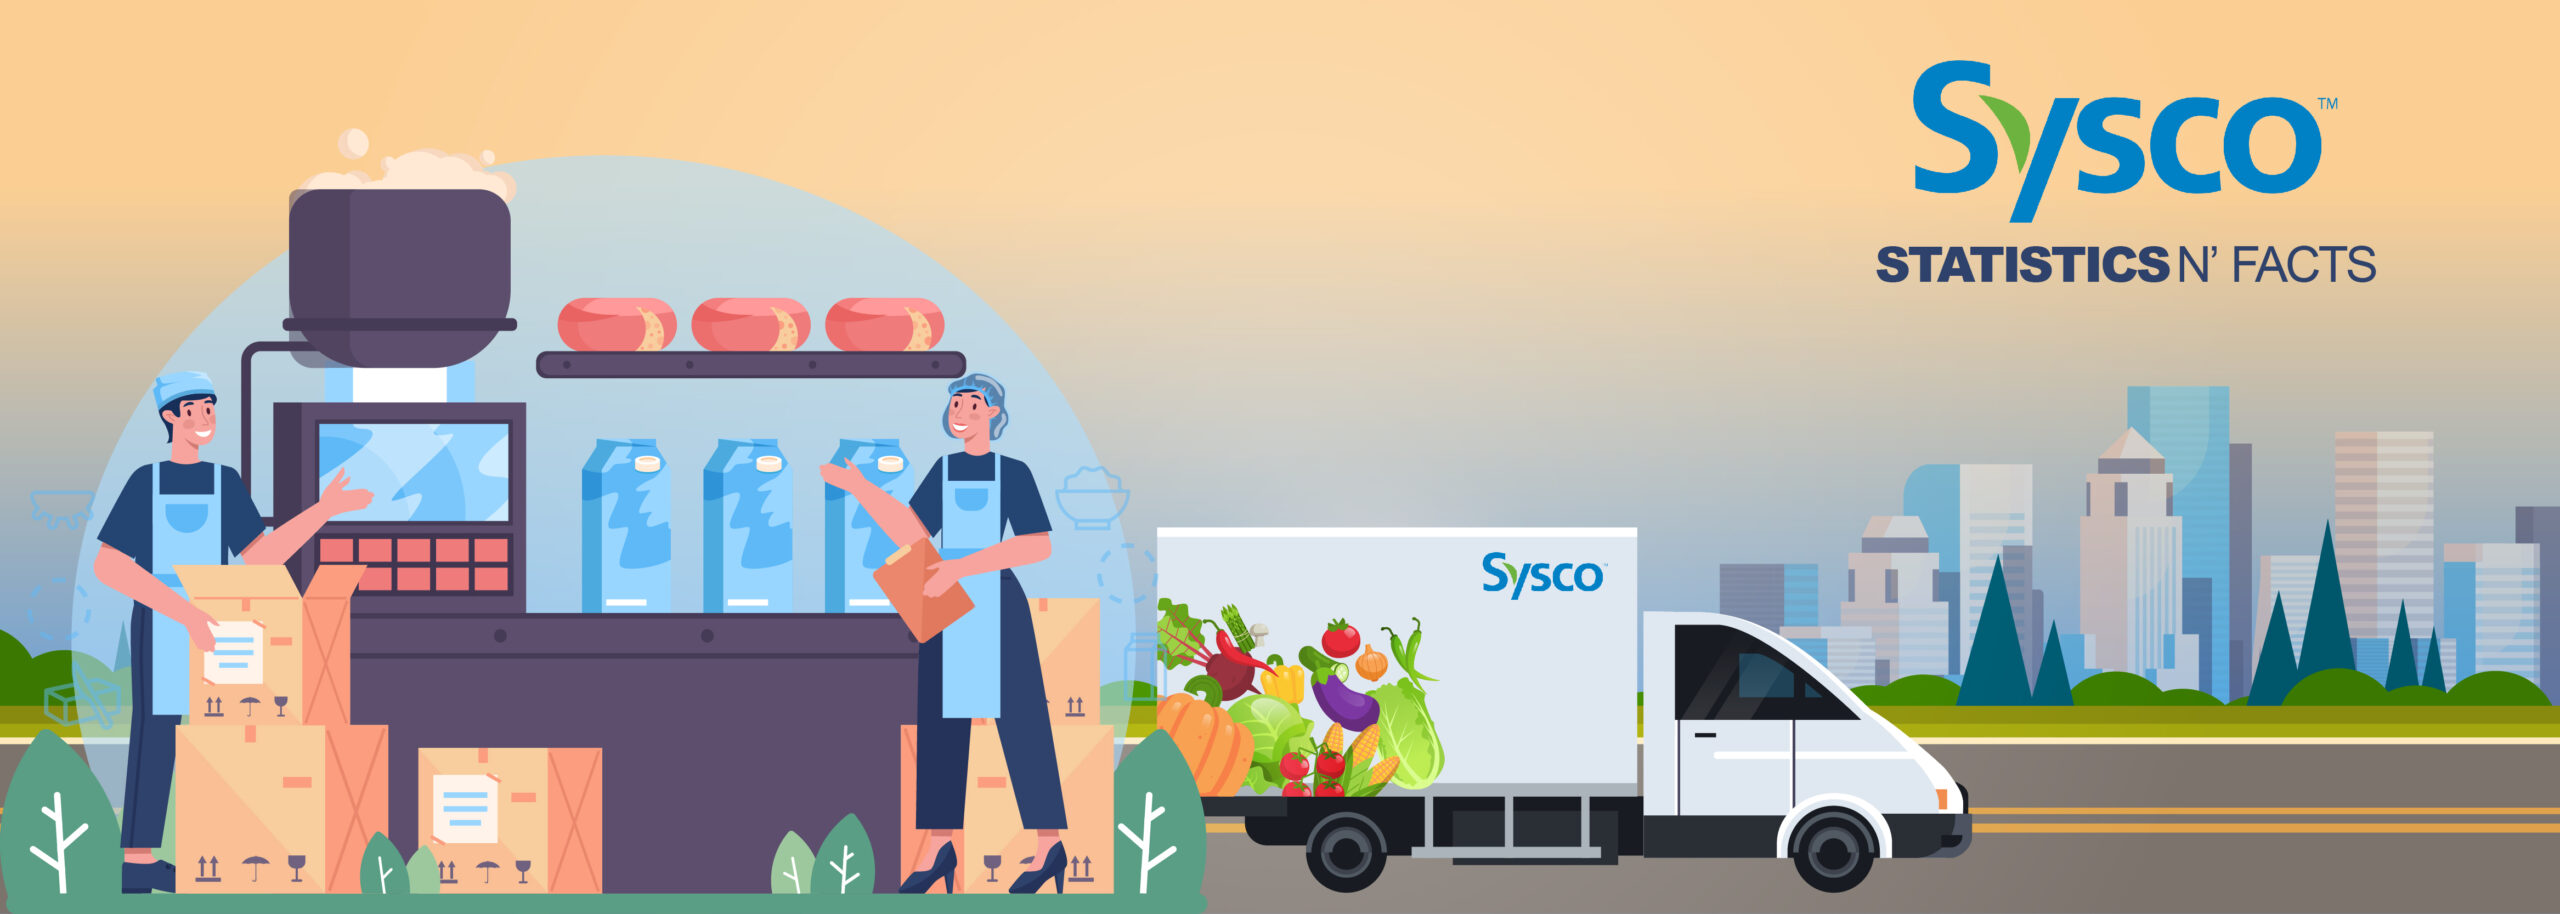 Sysco Corporation Statistics and Facts